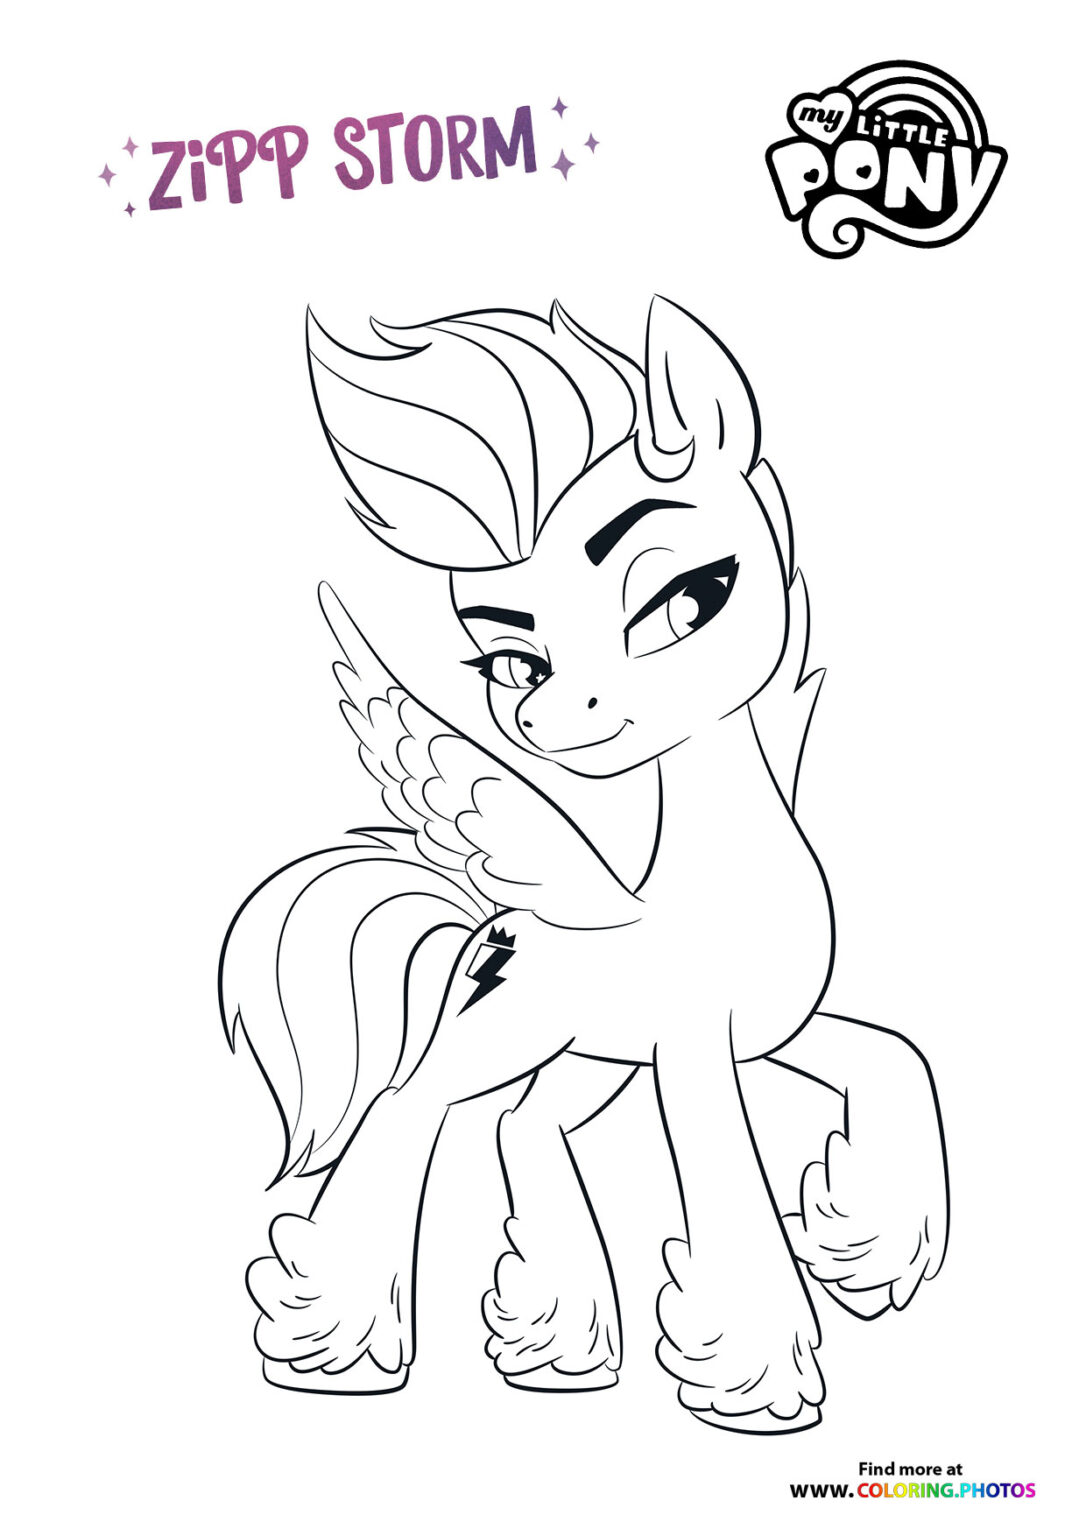 My Little Pony - A New Generation coloring pages for kids | Print for free